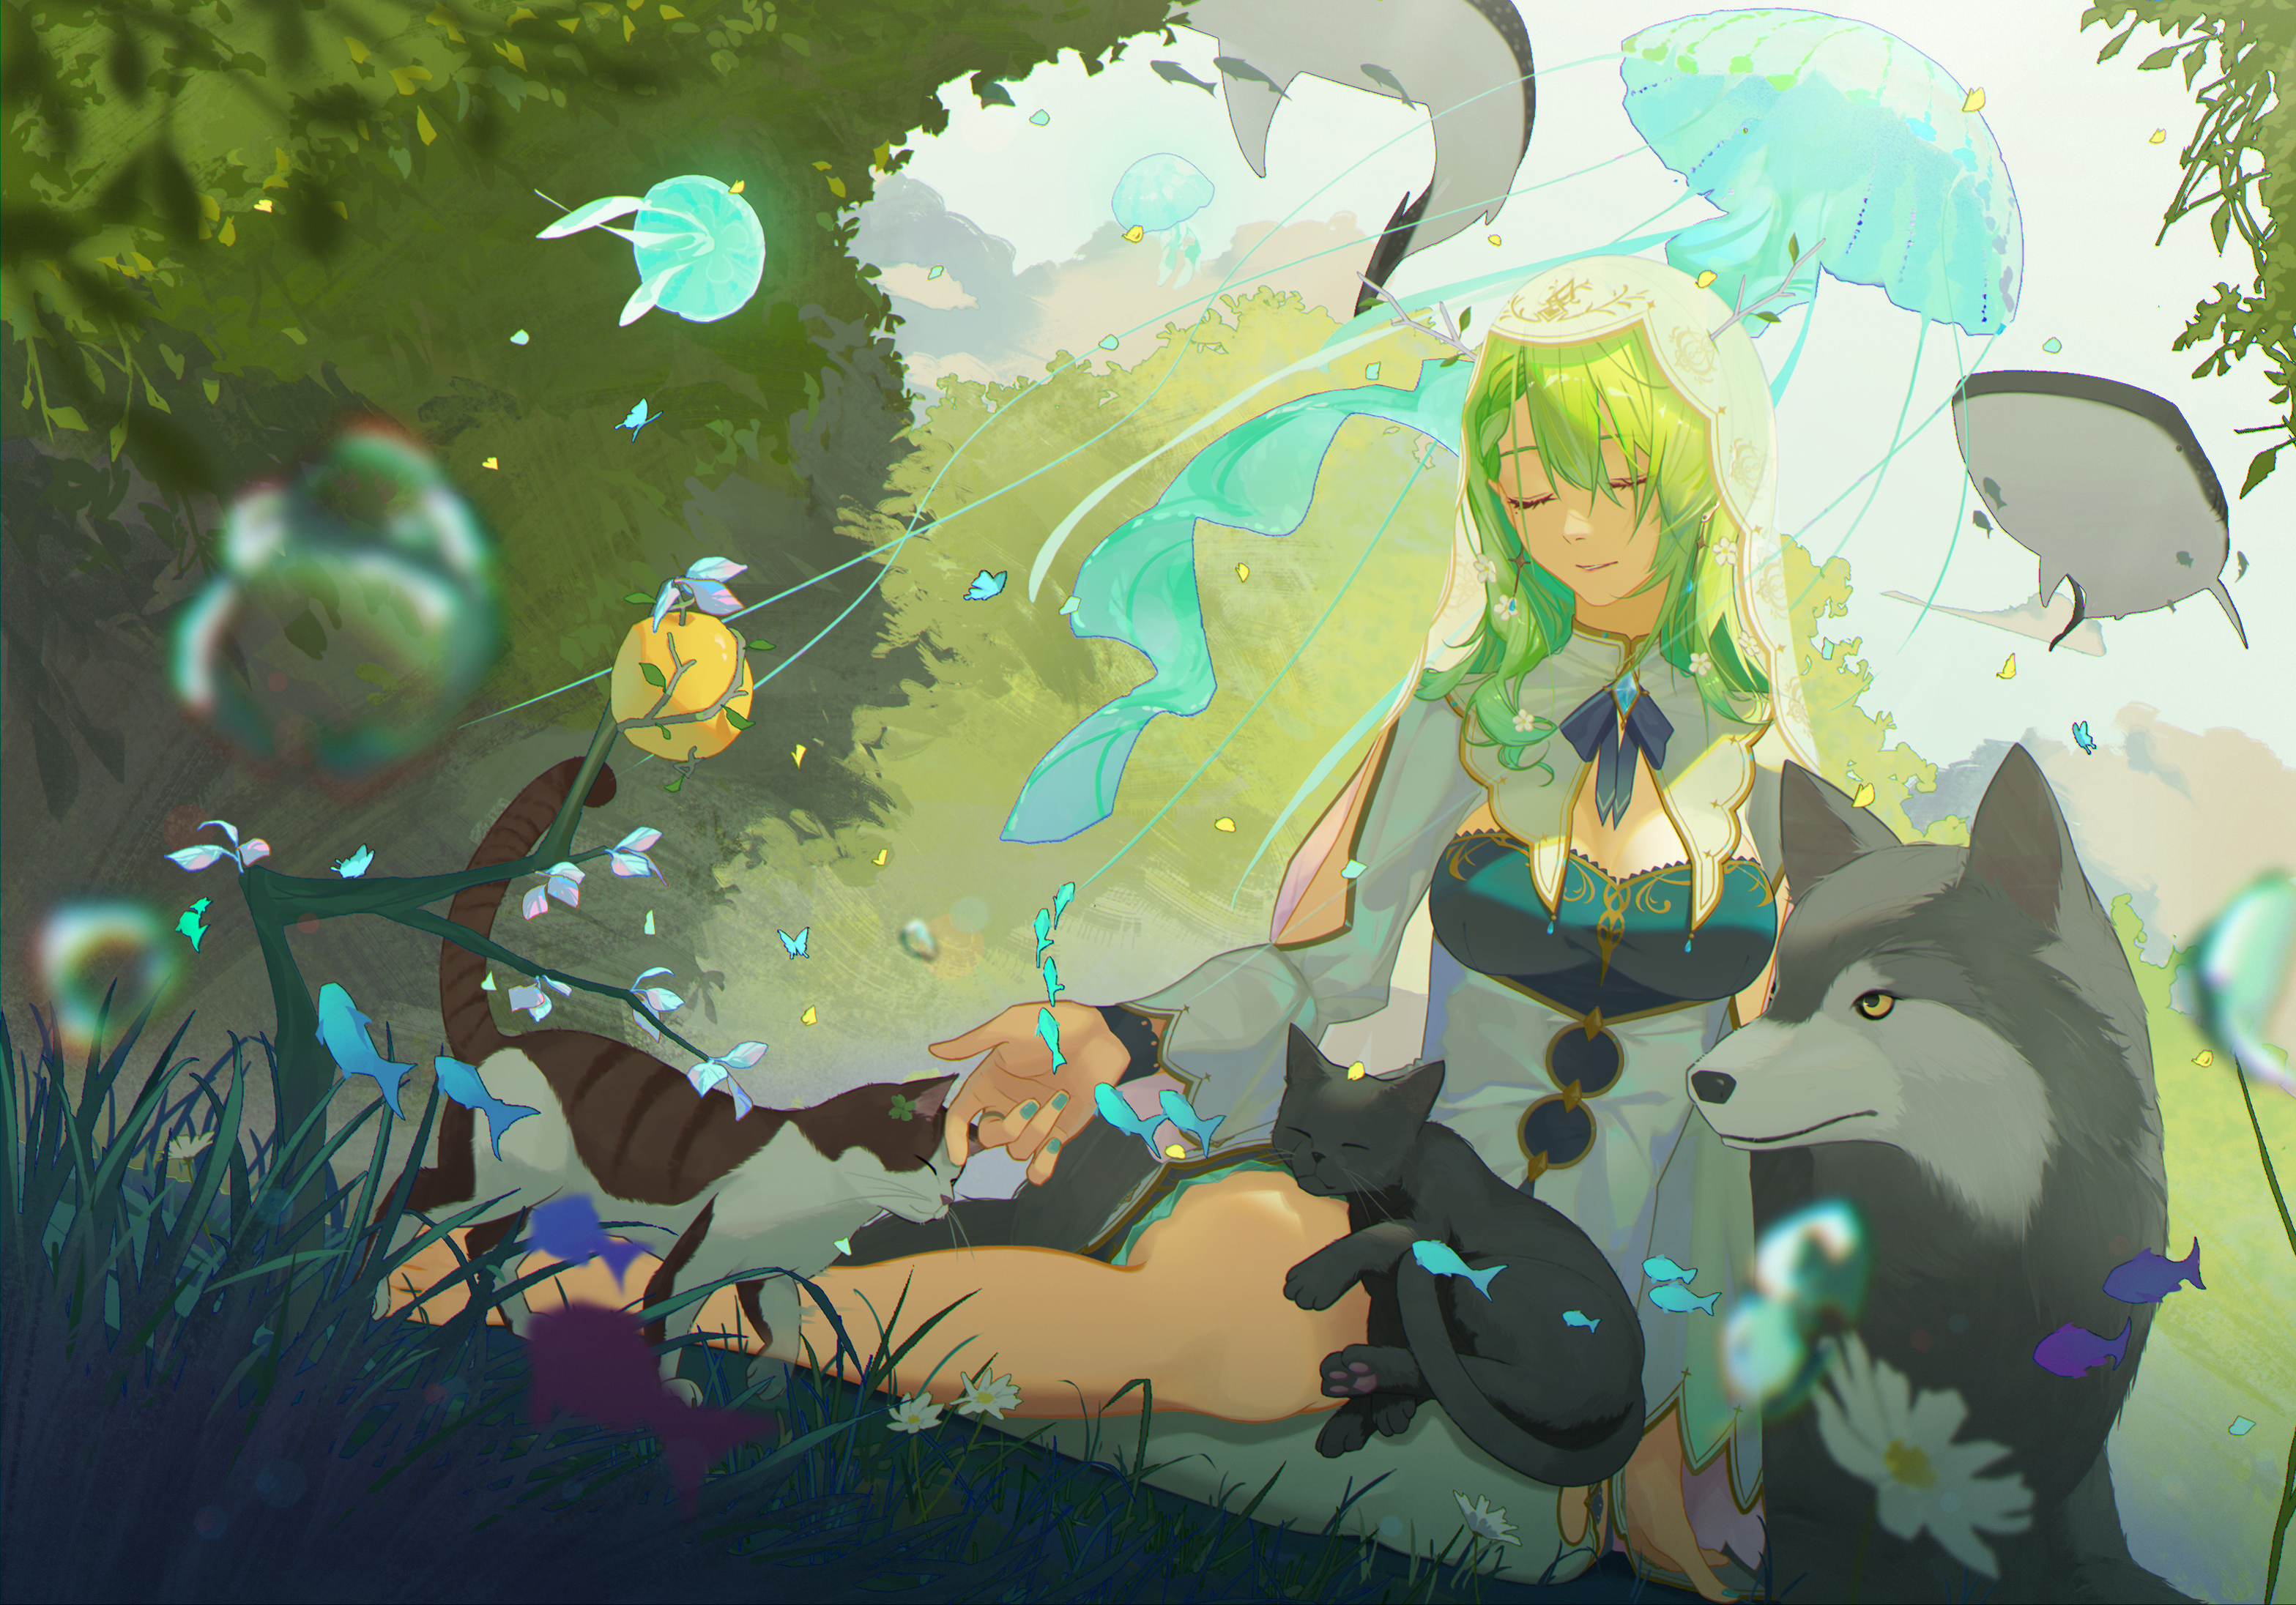 Anime 3135x2192 Ceres Fauna Hololive Hololive English Virtual Youtuber cats green hair wolf anime girls closed eyes grass water drops animals bow tie earring fish